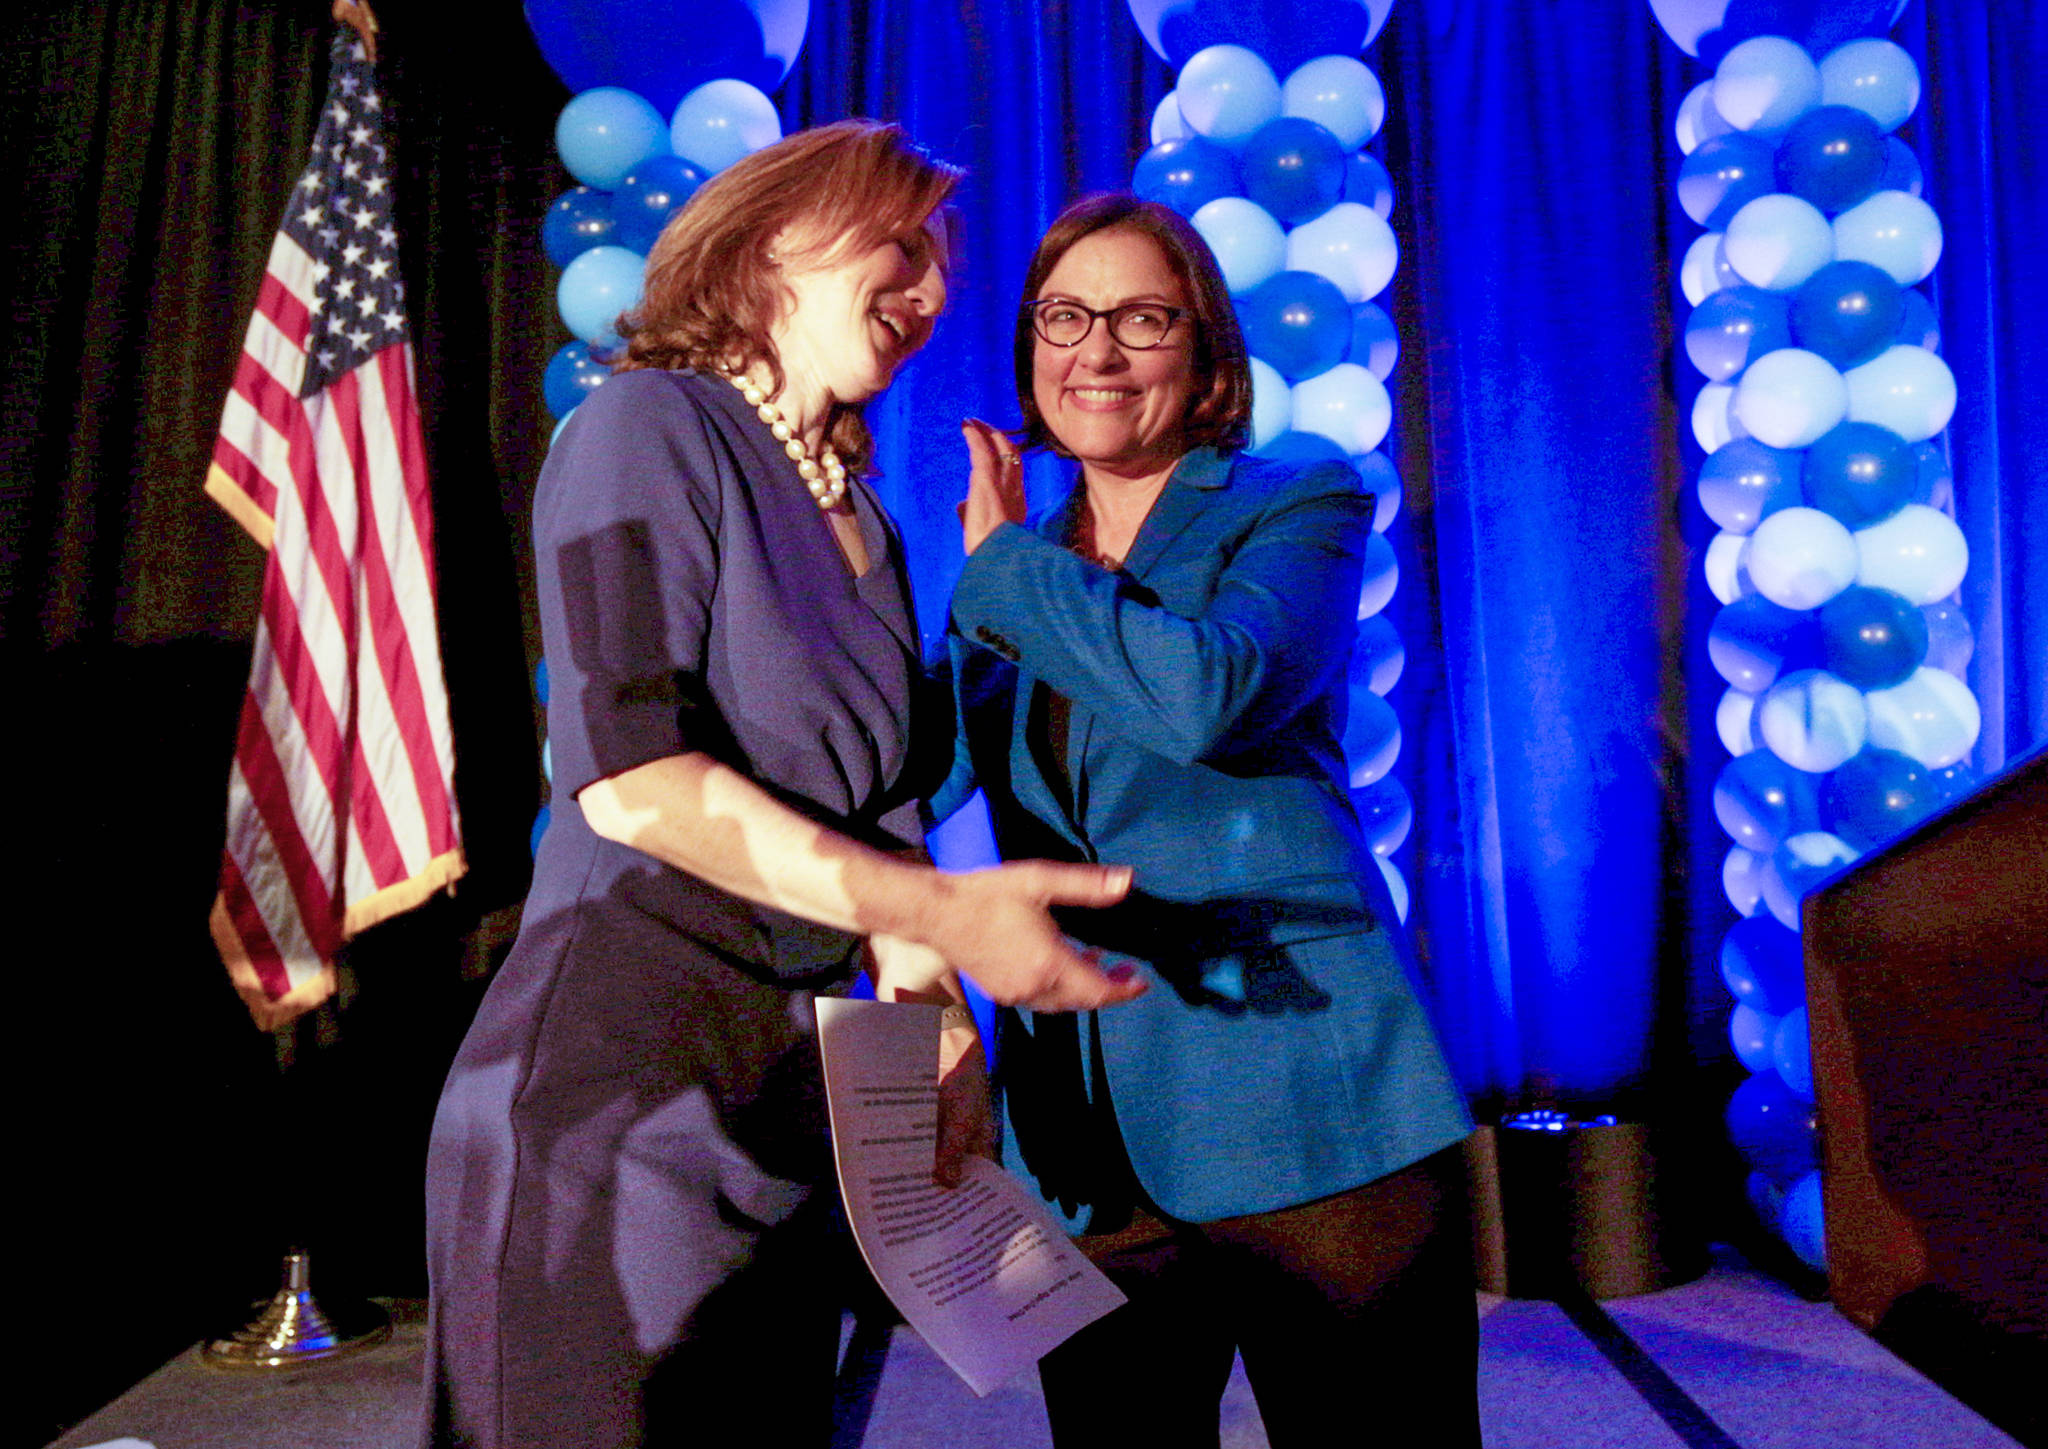 U.S. Rep. Suzan DelBene of Washington’s 1st District gave 8th District candidate Dr. Kim Schrier a hug after speaking at the Washington State Democratic Party’s 2018 election night party at the Bellevue Hilton on Tuesday. Schrier was leading GOP candidate Dino Rossi. DelBene handily won re-election. (Andy Bronson / The Herald)